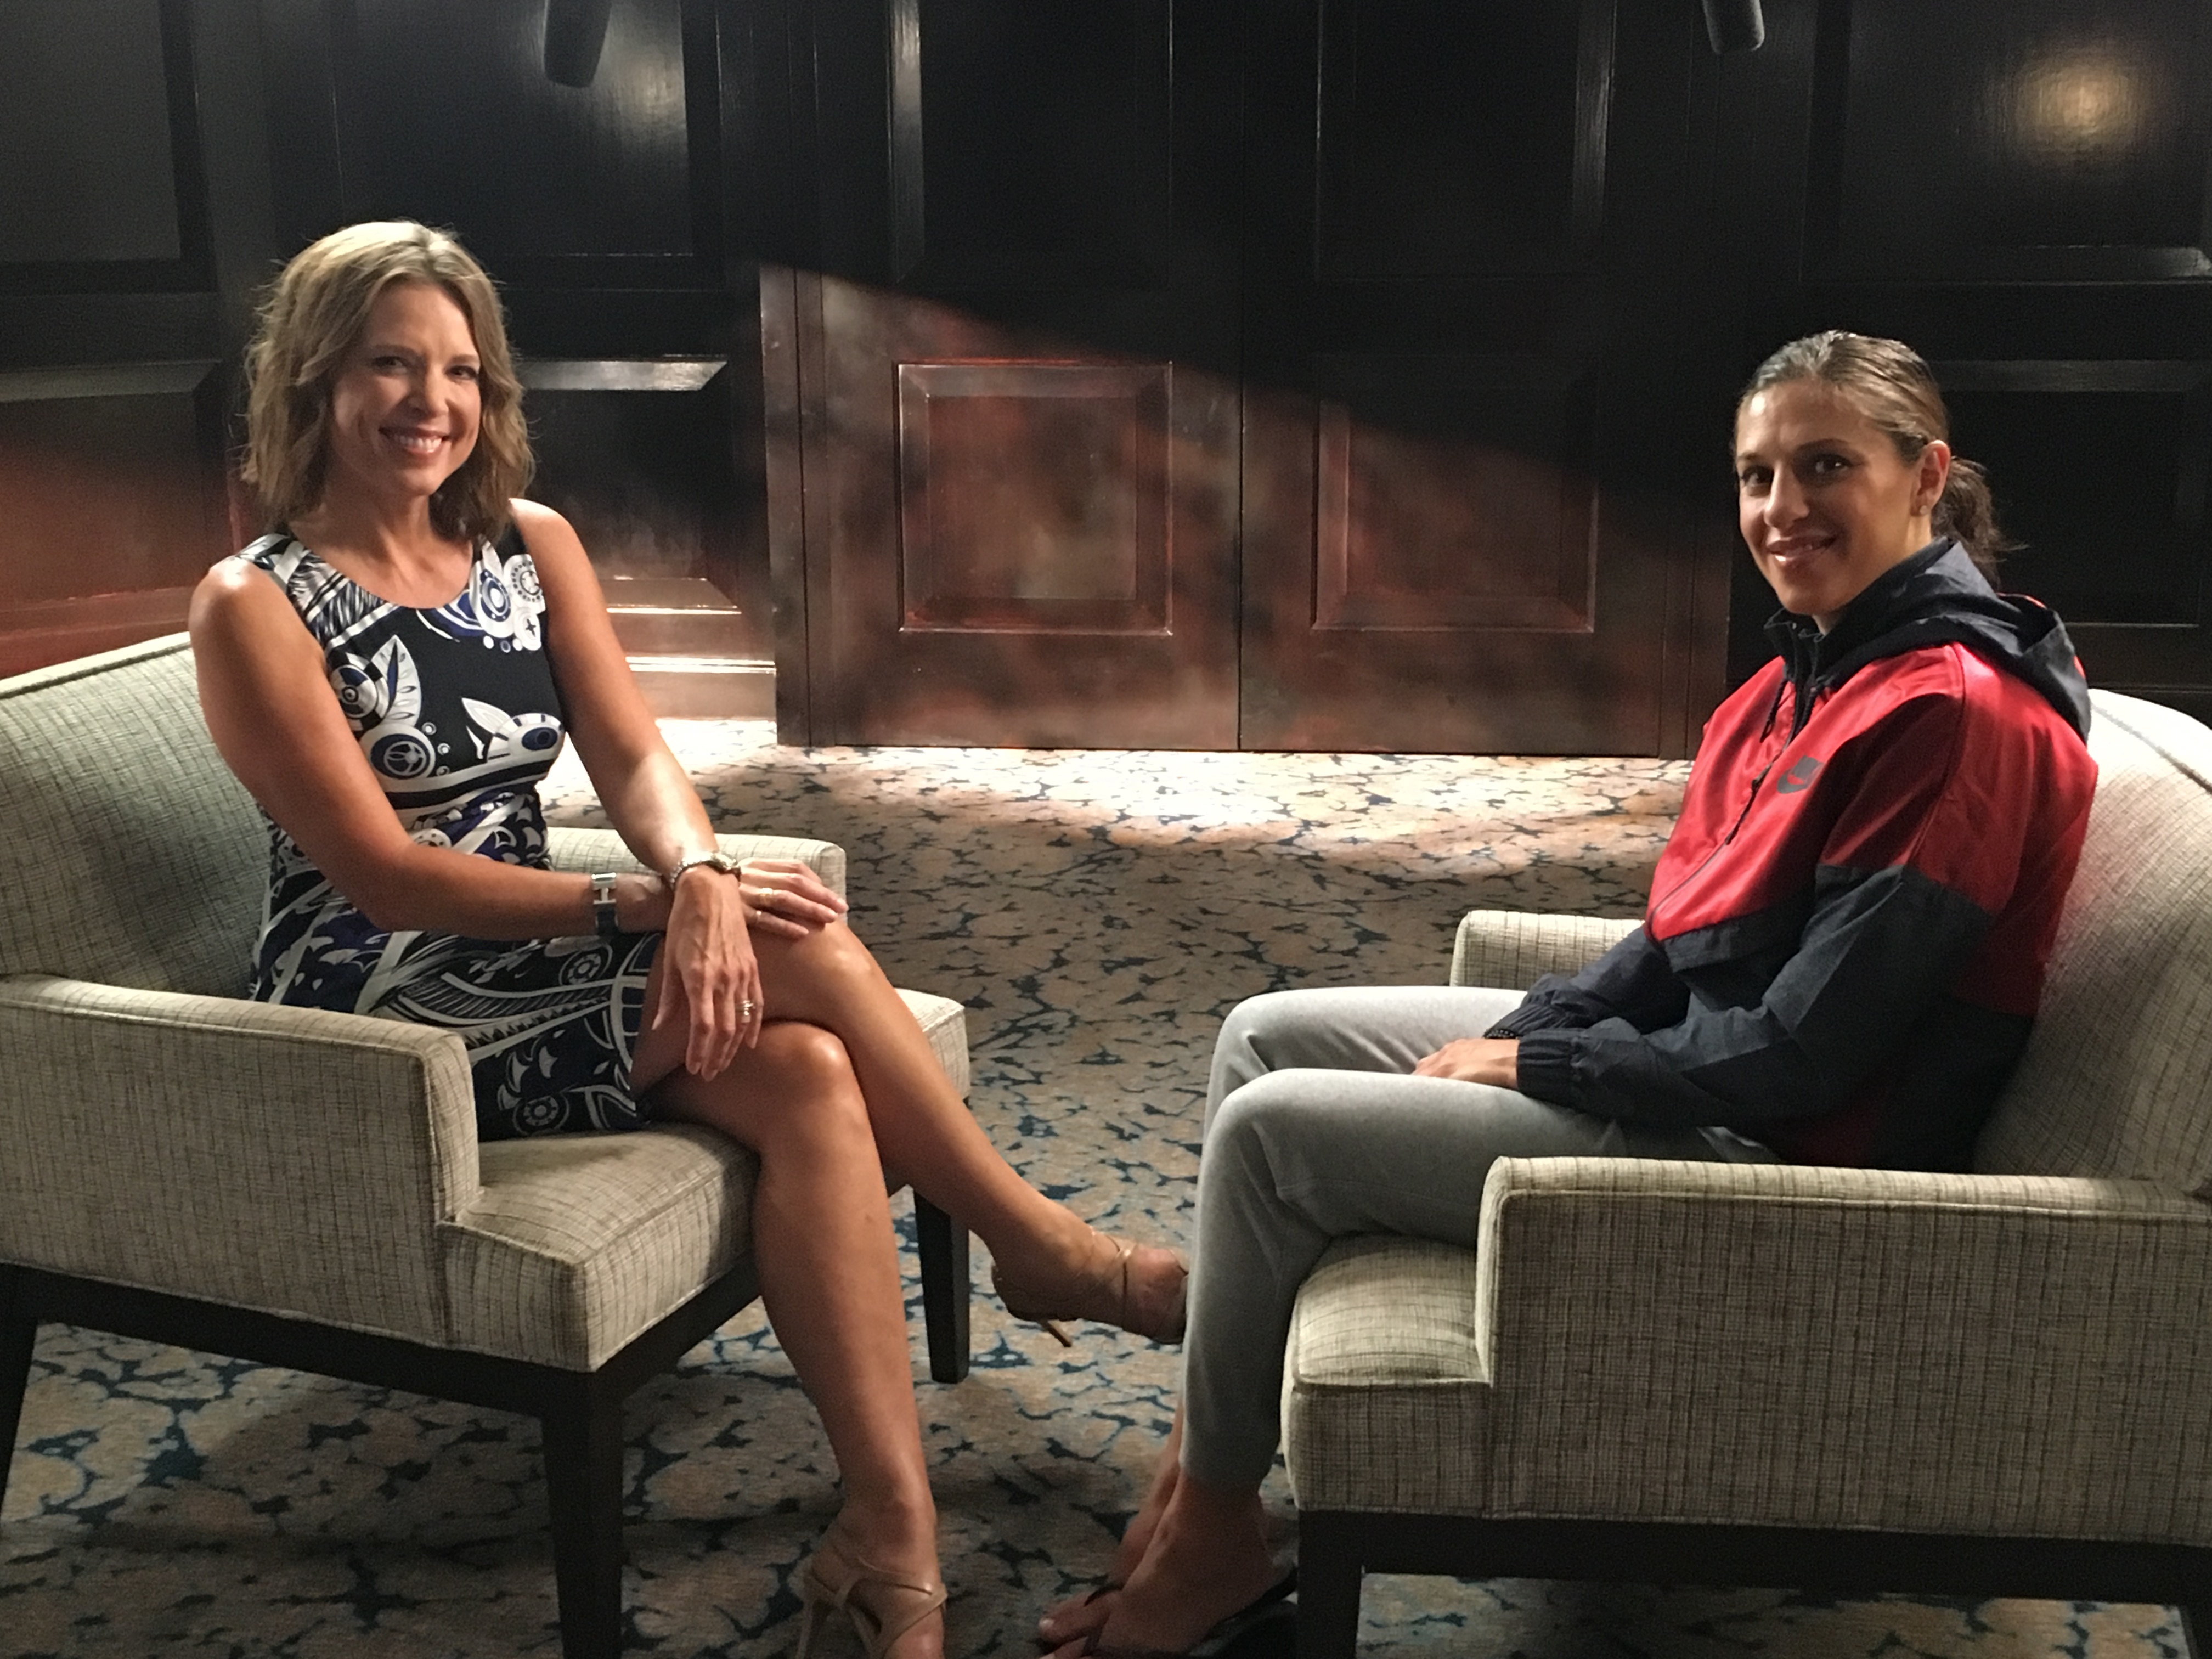 UNWNT member Carli Lloyd will be one of many Olympic athletes interviewed by Hannah Storm on SportsCenter telecasts from the Rio Olympics. (photo courtesy Hannah Storm)